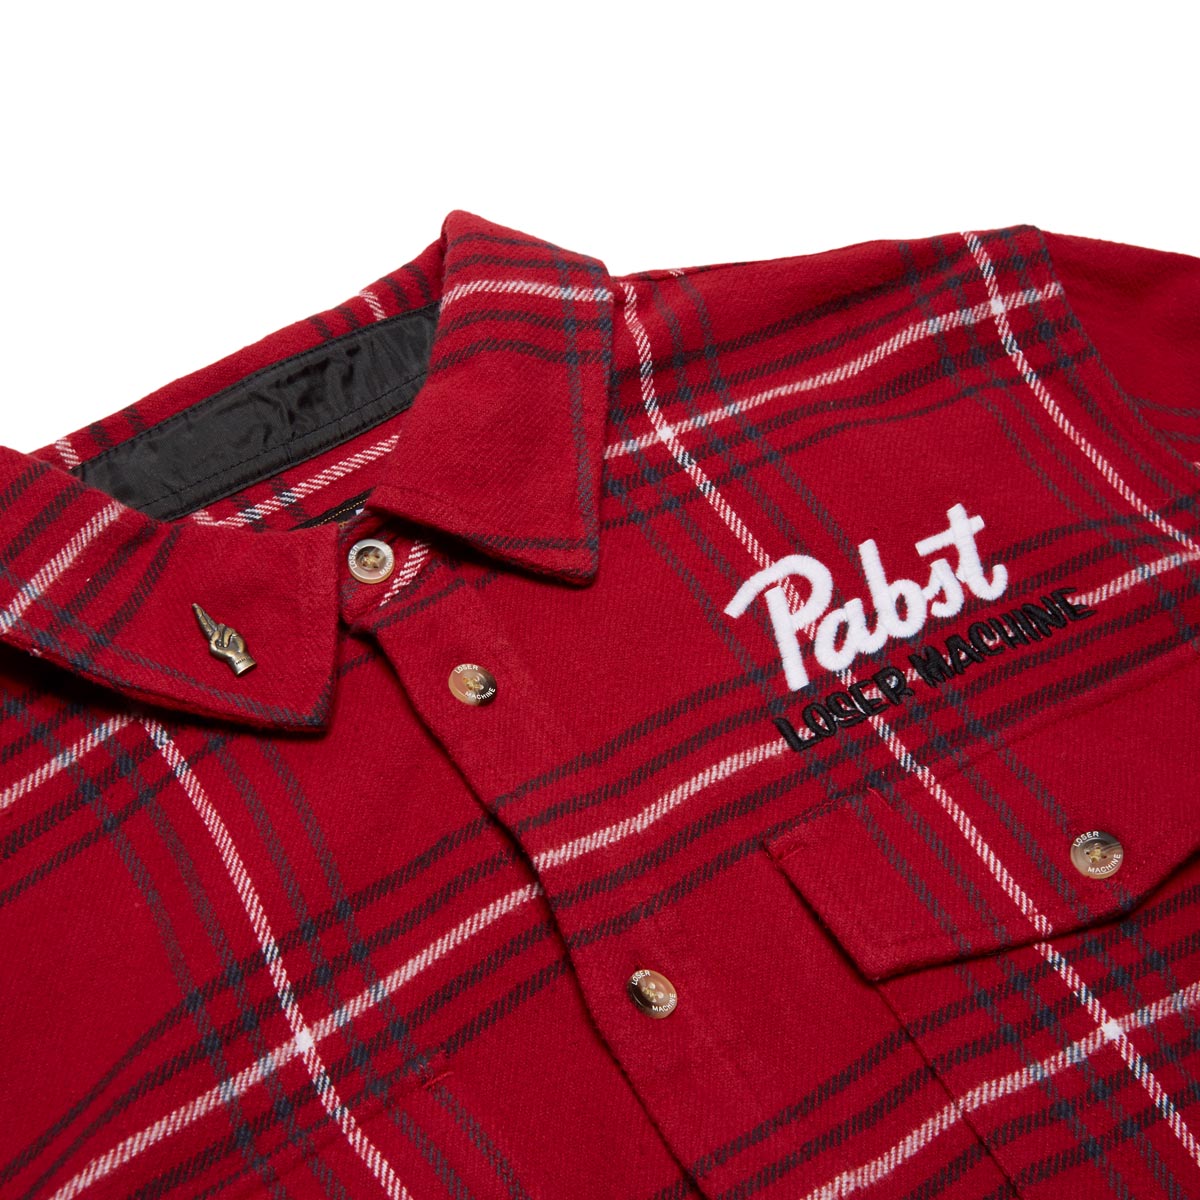 Loser Machine x Pabst Blue Ribbon Flannel Shirt - Red image 2